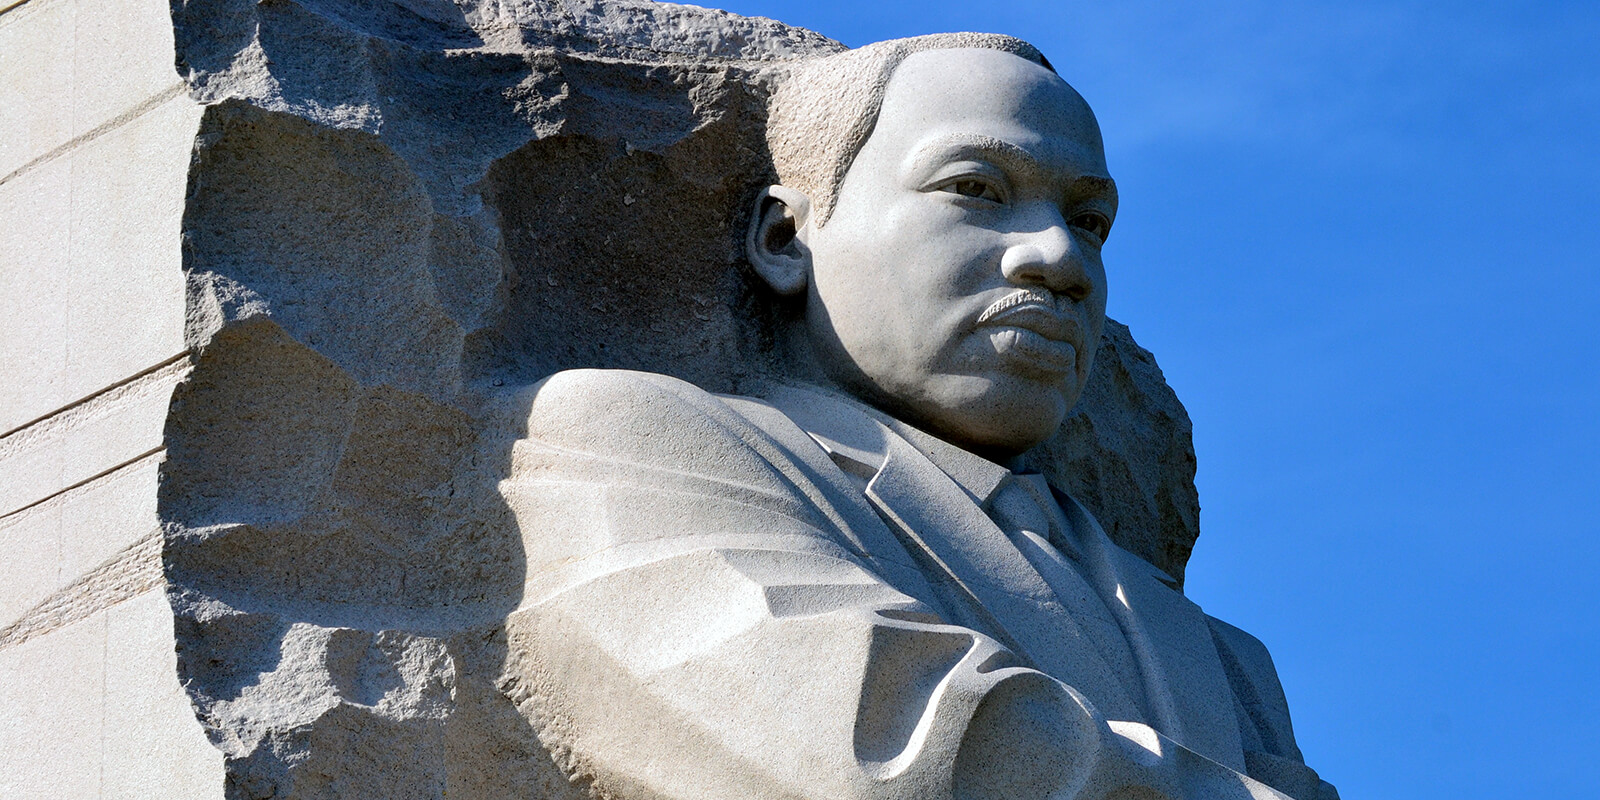 Reviving Dr. King’s legacy